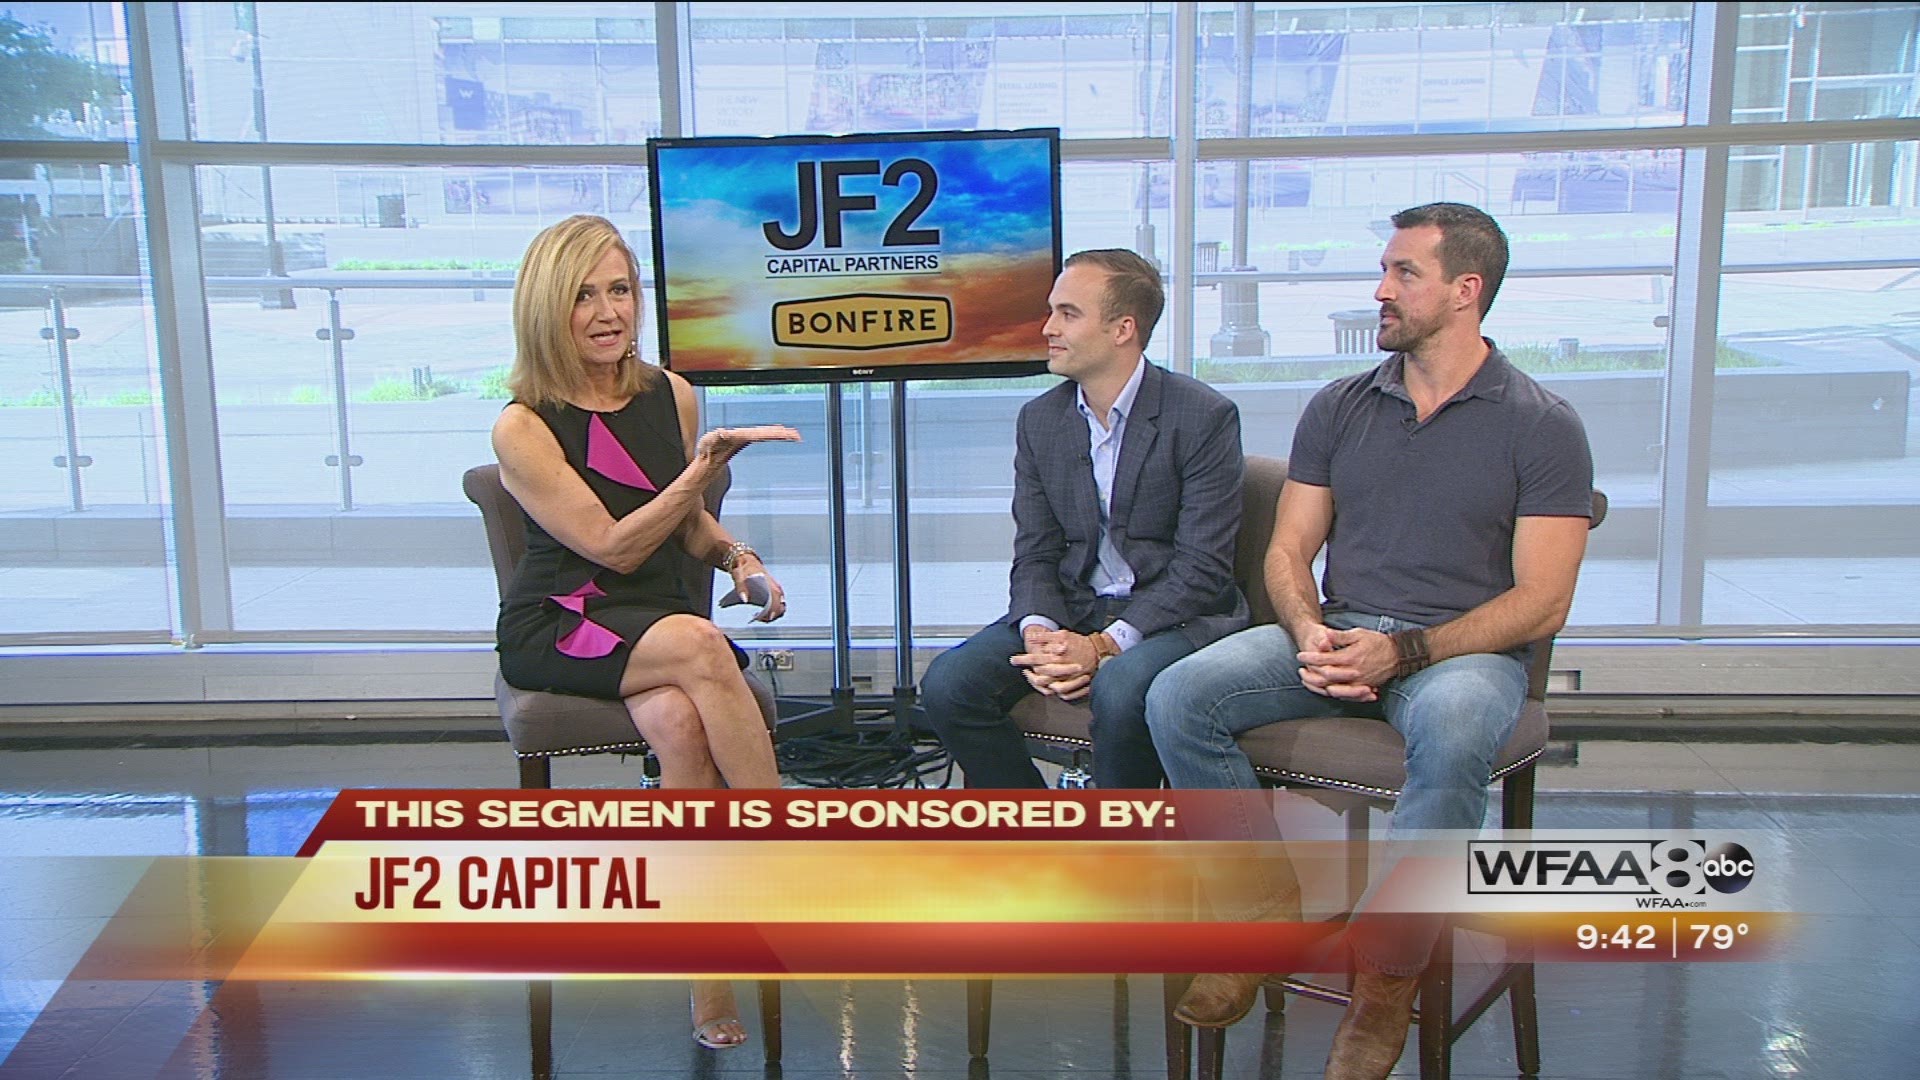 Grow your company with JF2 Capital